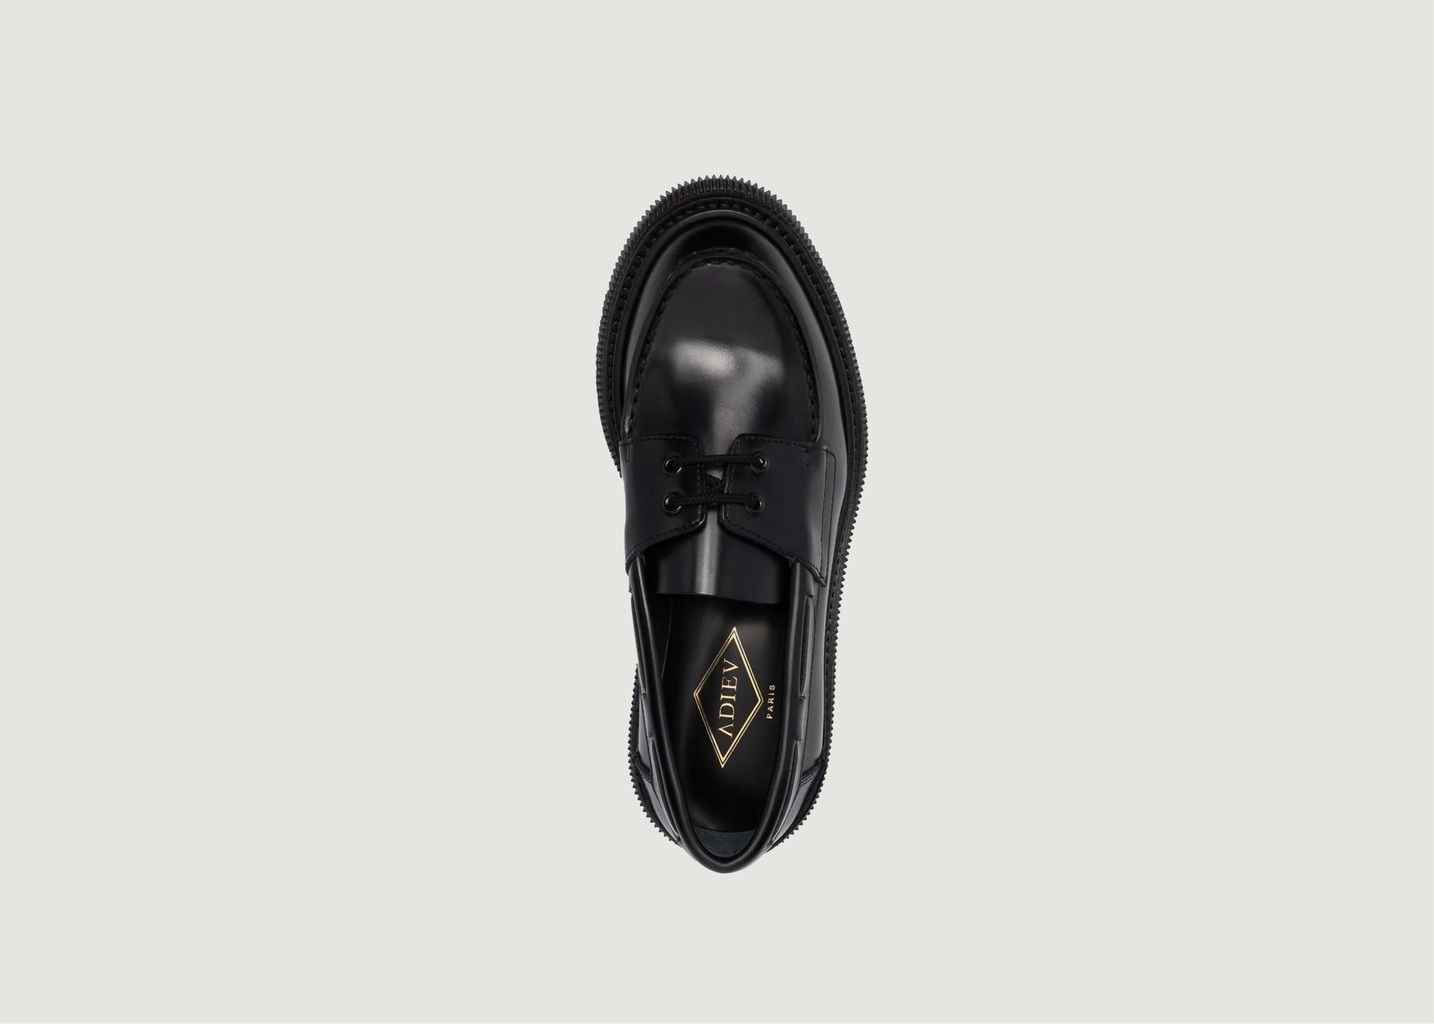 Type 174 Loafers - Adieu